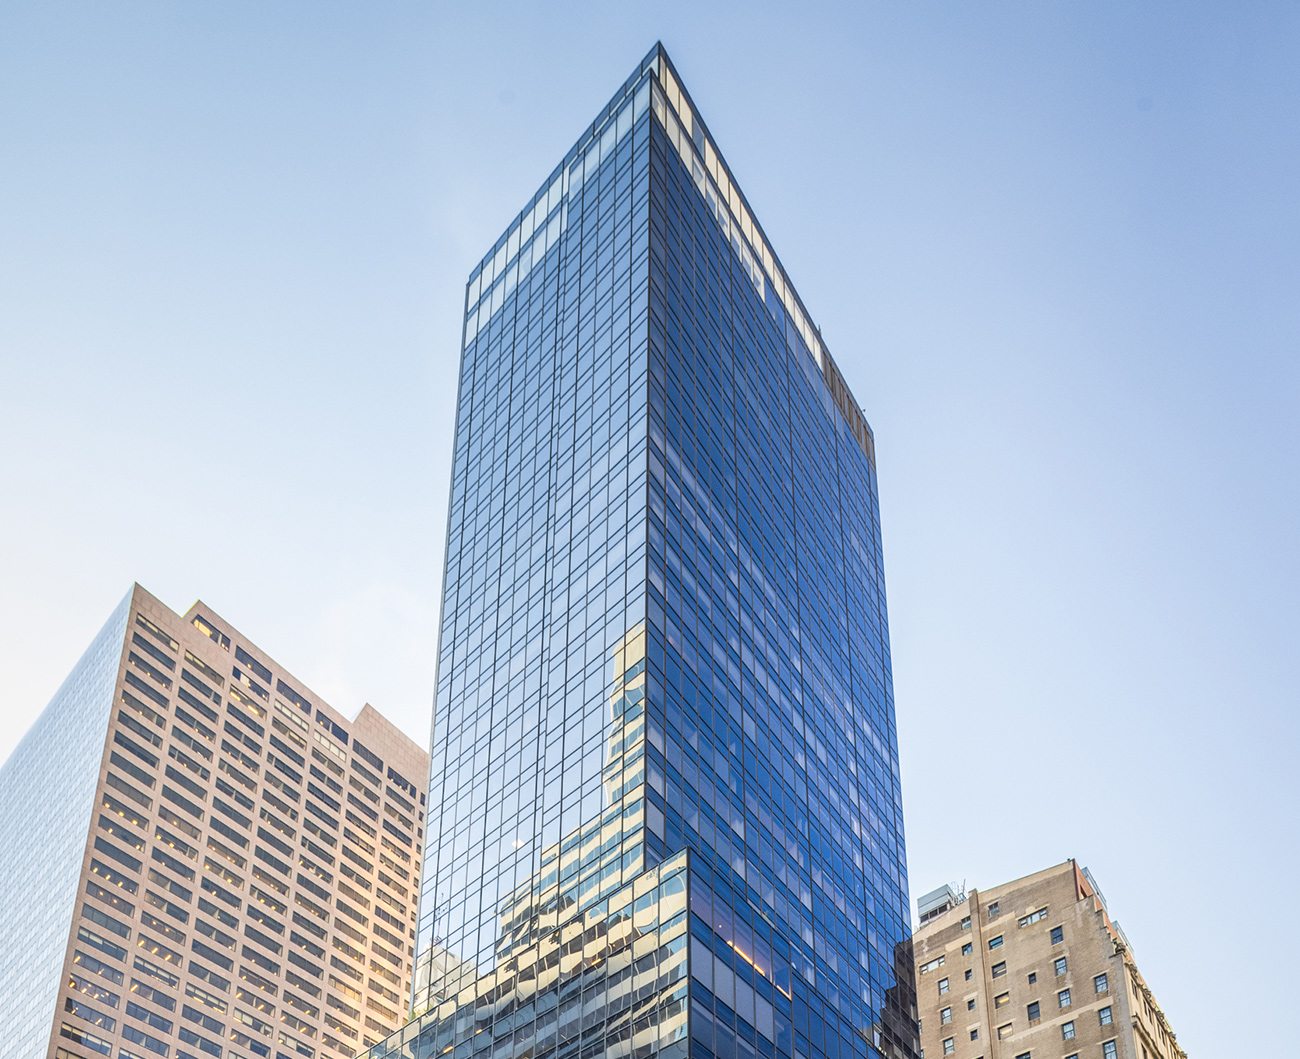 Exterior view of the 540 Madison building in New York City.